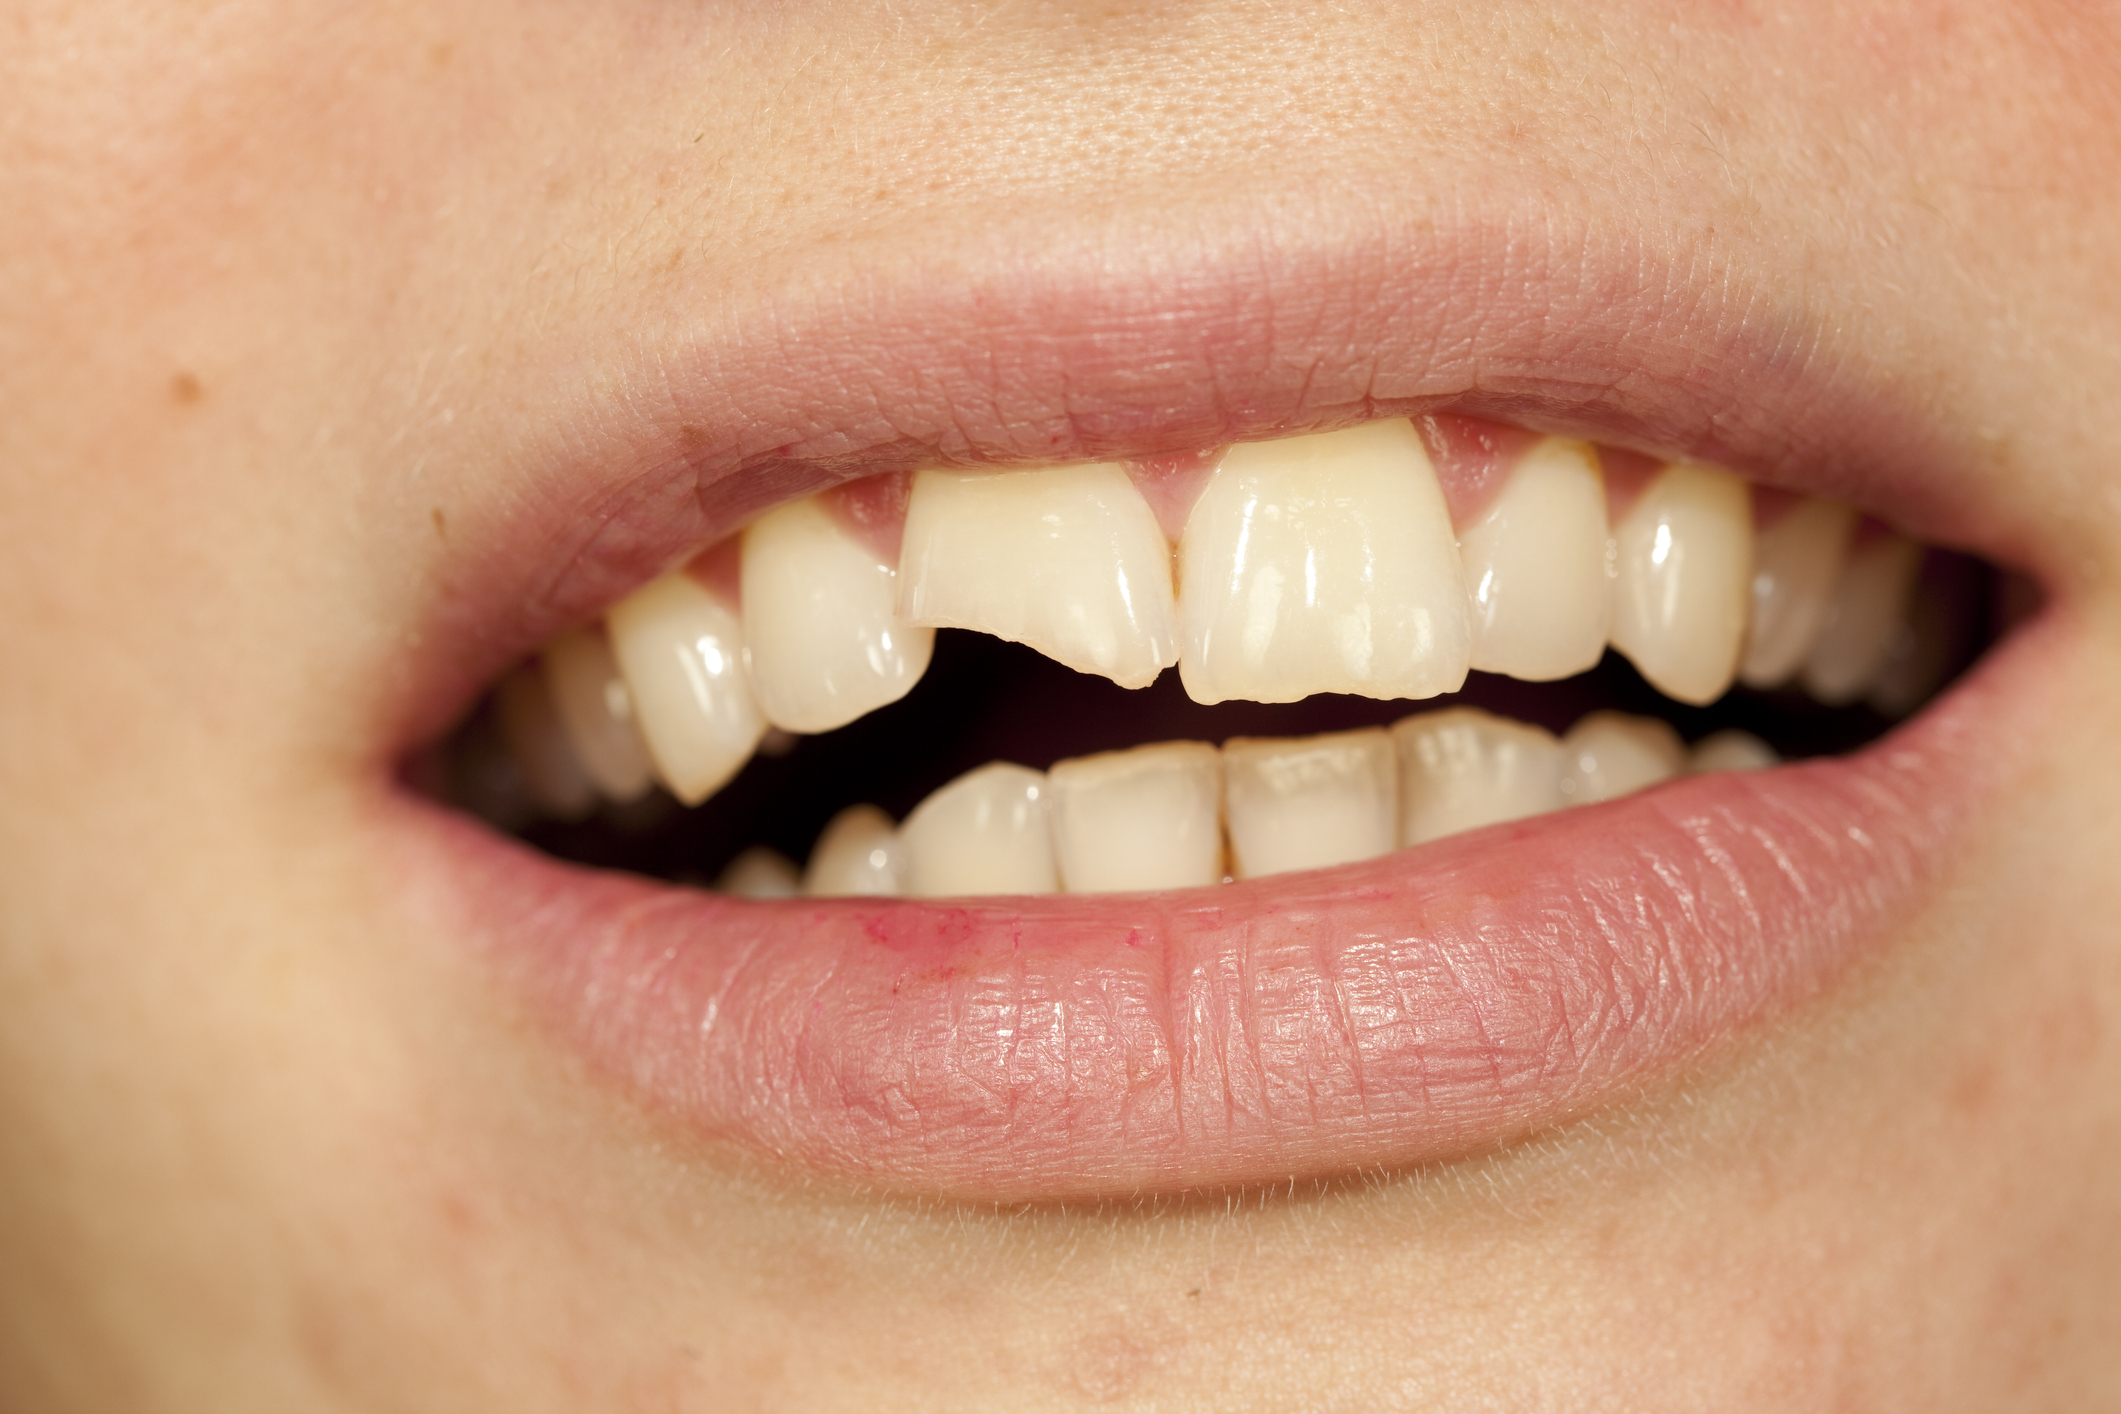 Person smiling with broken front teeth